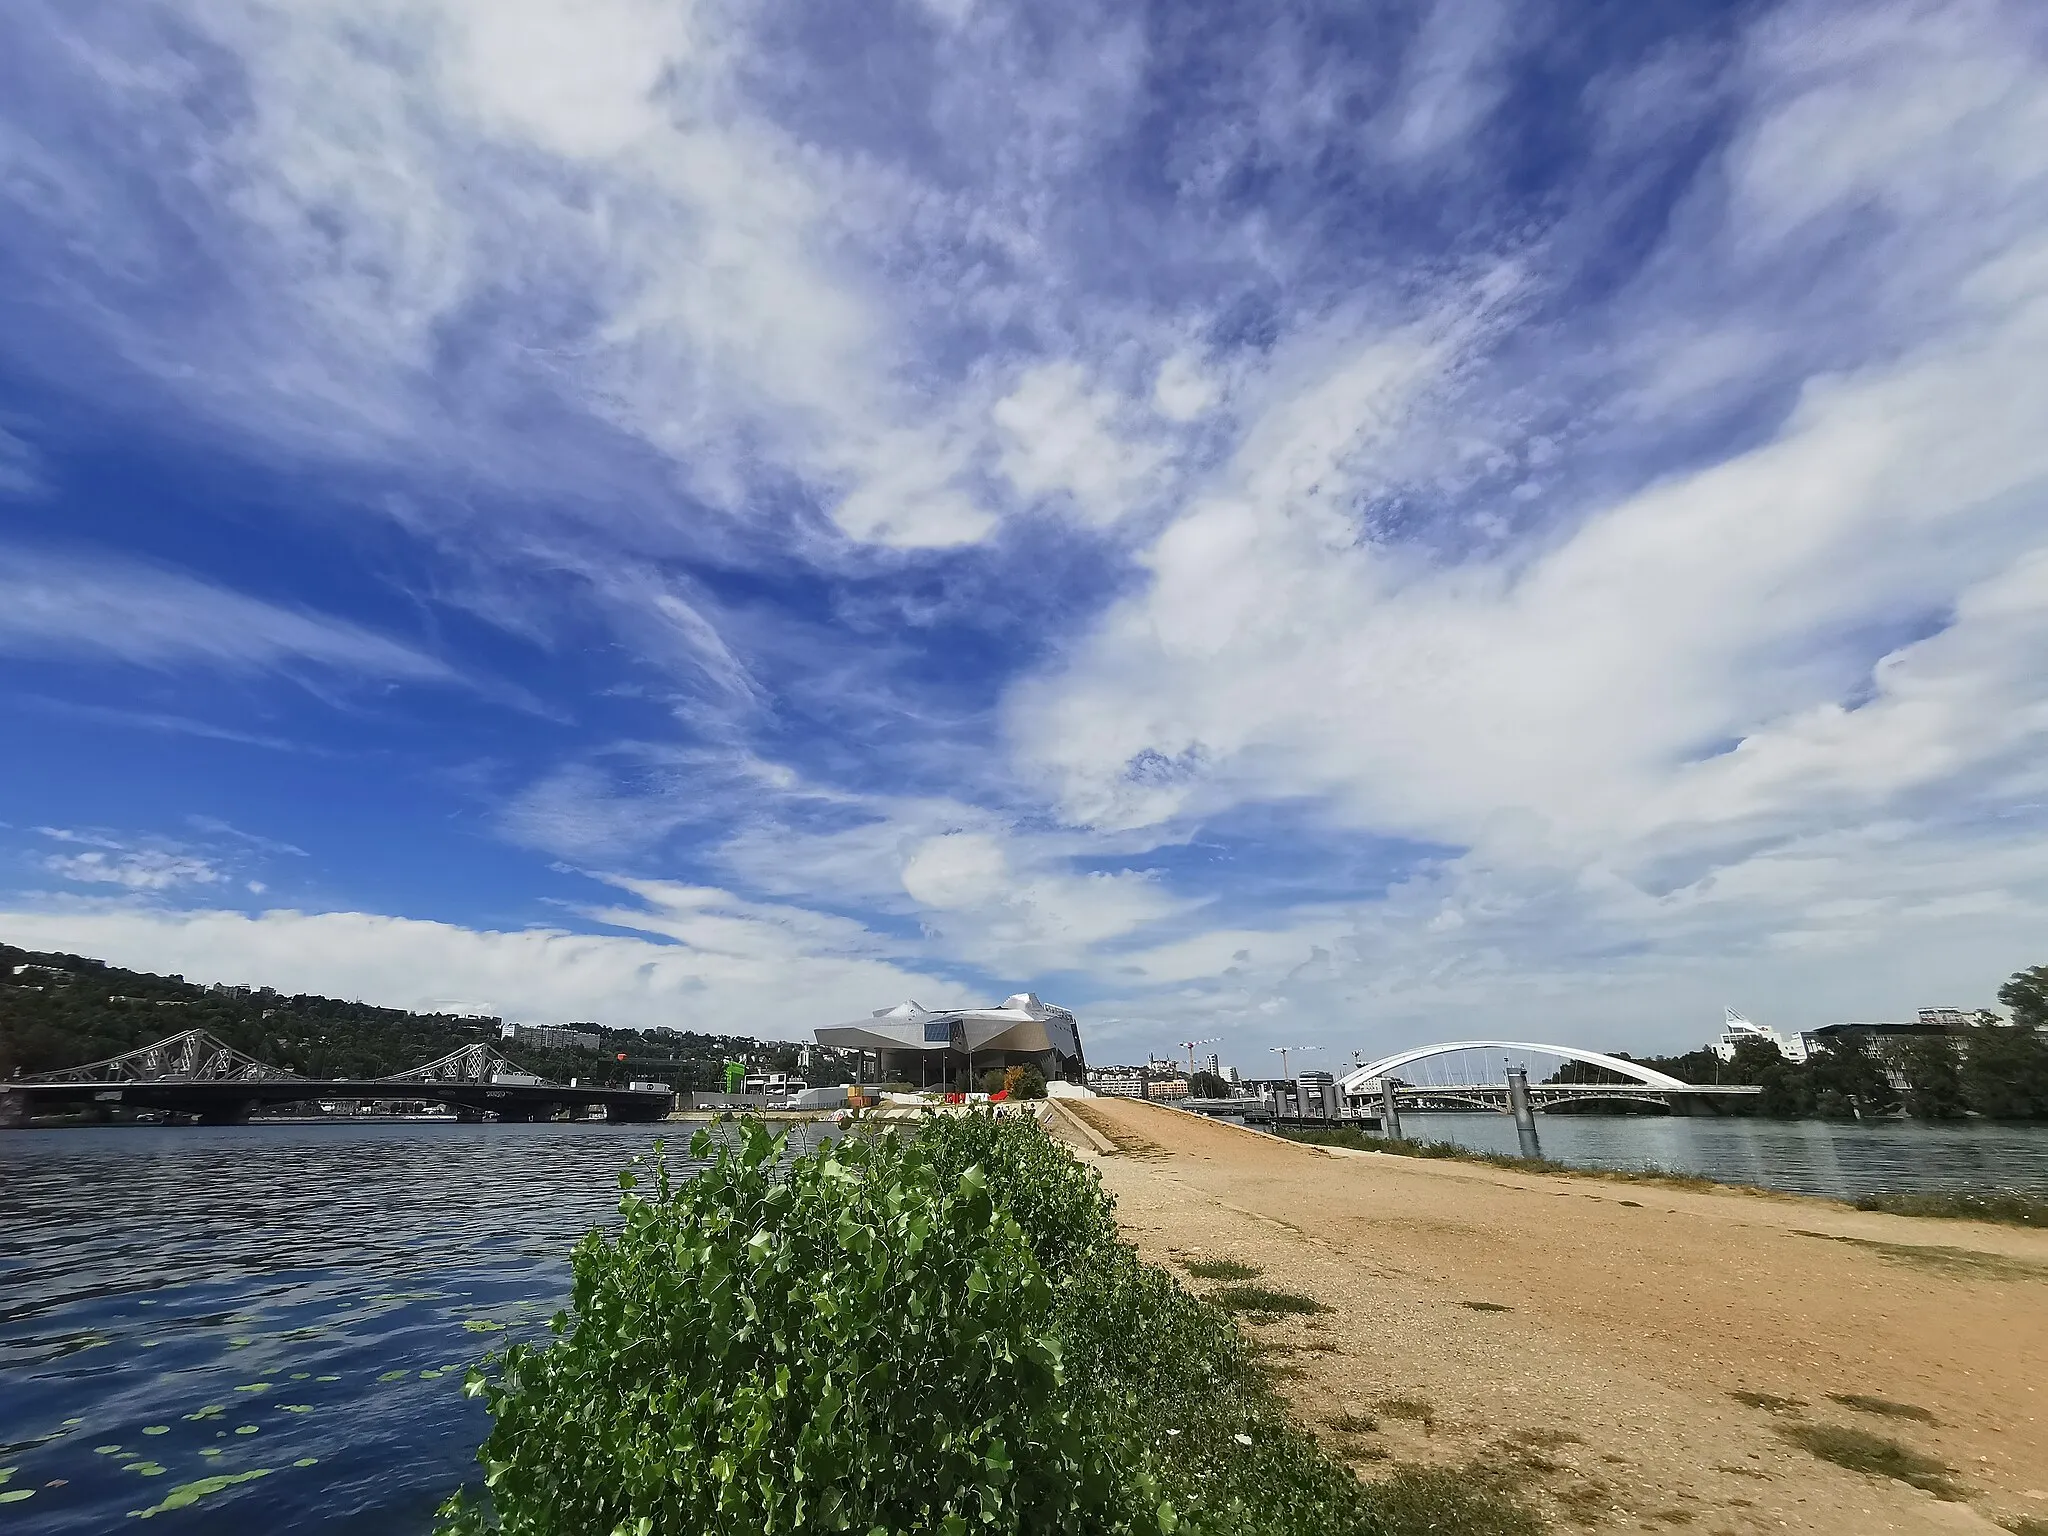 Photo showing: Photo taken at the farthest point of the Lyon peninsula (at the confluence of the Rhone and the Saône).  On the left, the Saône and the Mulatière bridges.  In the center, the Confluences museum. On the right, the Rhône and the Raymond Barre bridge.  Farthest to the right, the Docteur Charles Mérieux Lycée (which opened in September 2021). The green Euronews building is just visible on the right of the museum, and the Fourvière Basilica is just visible to its left (in the distance).